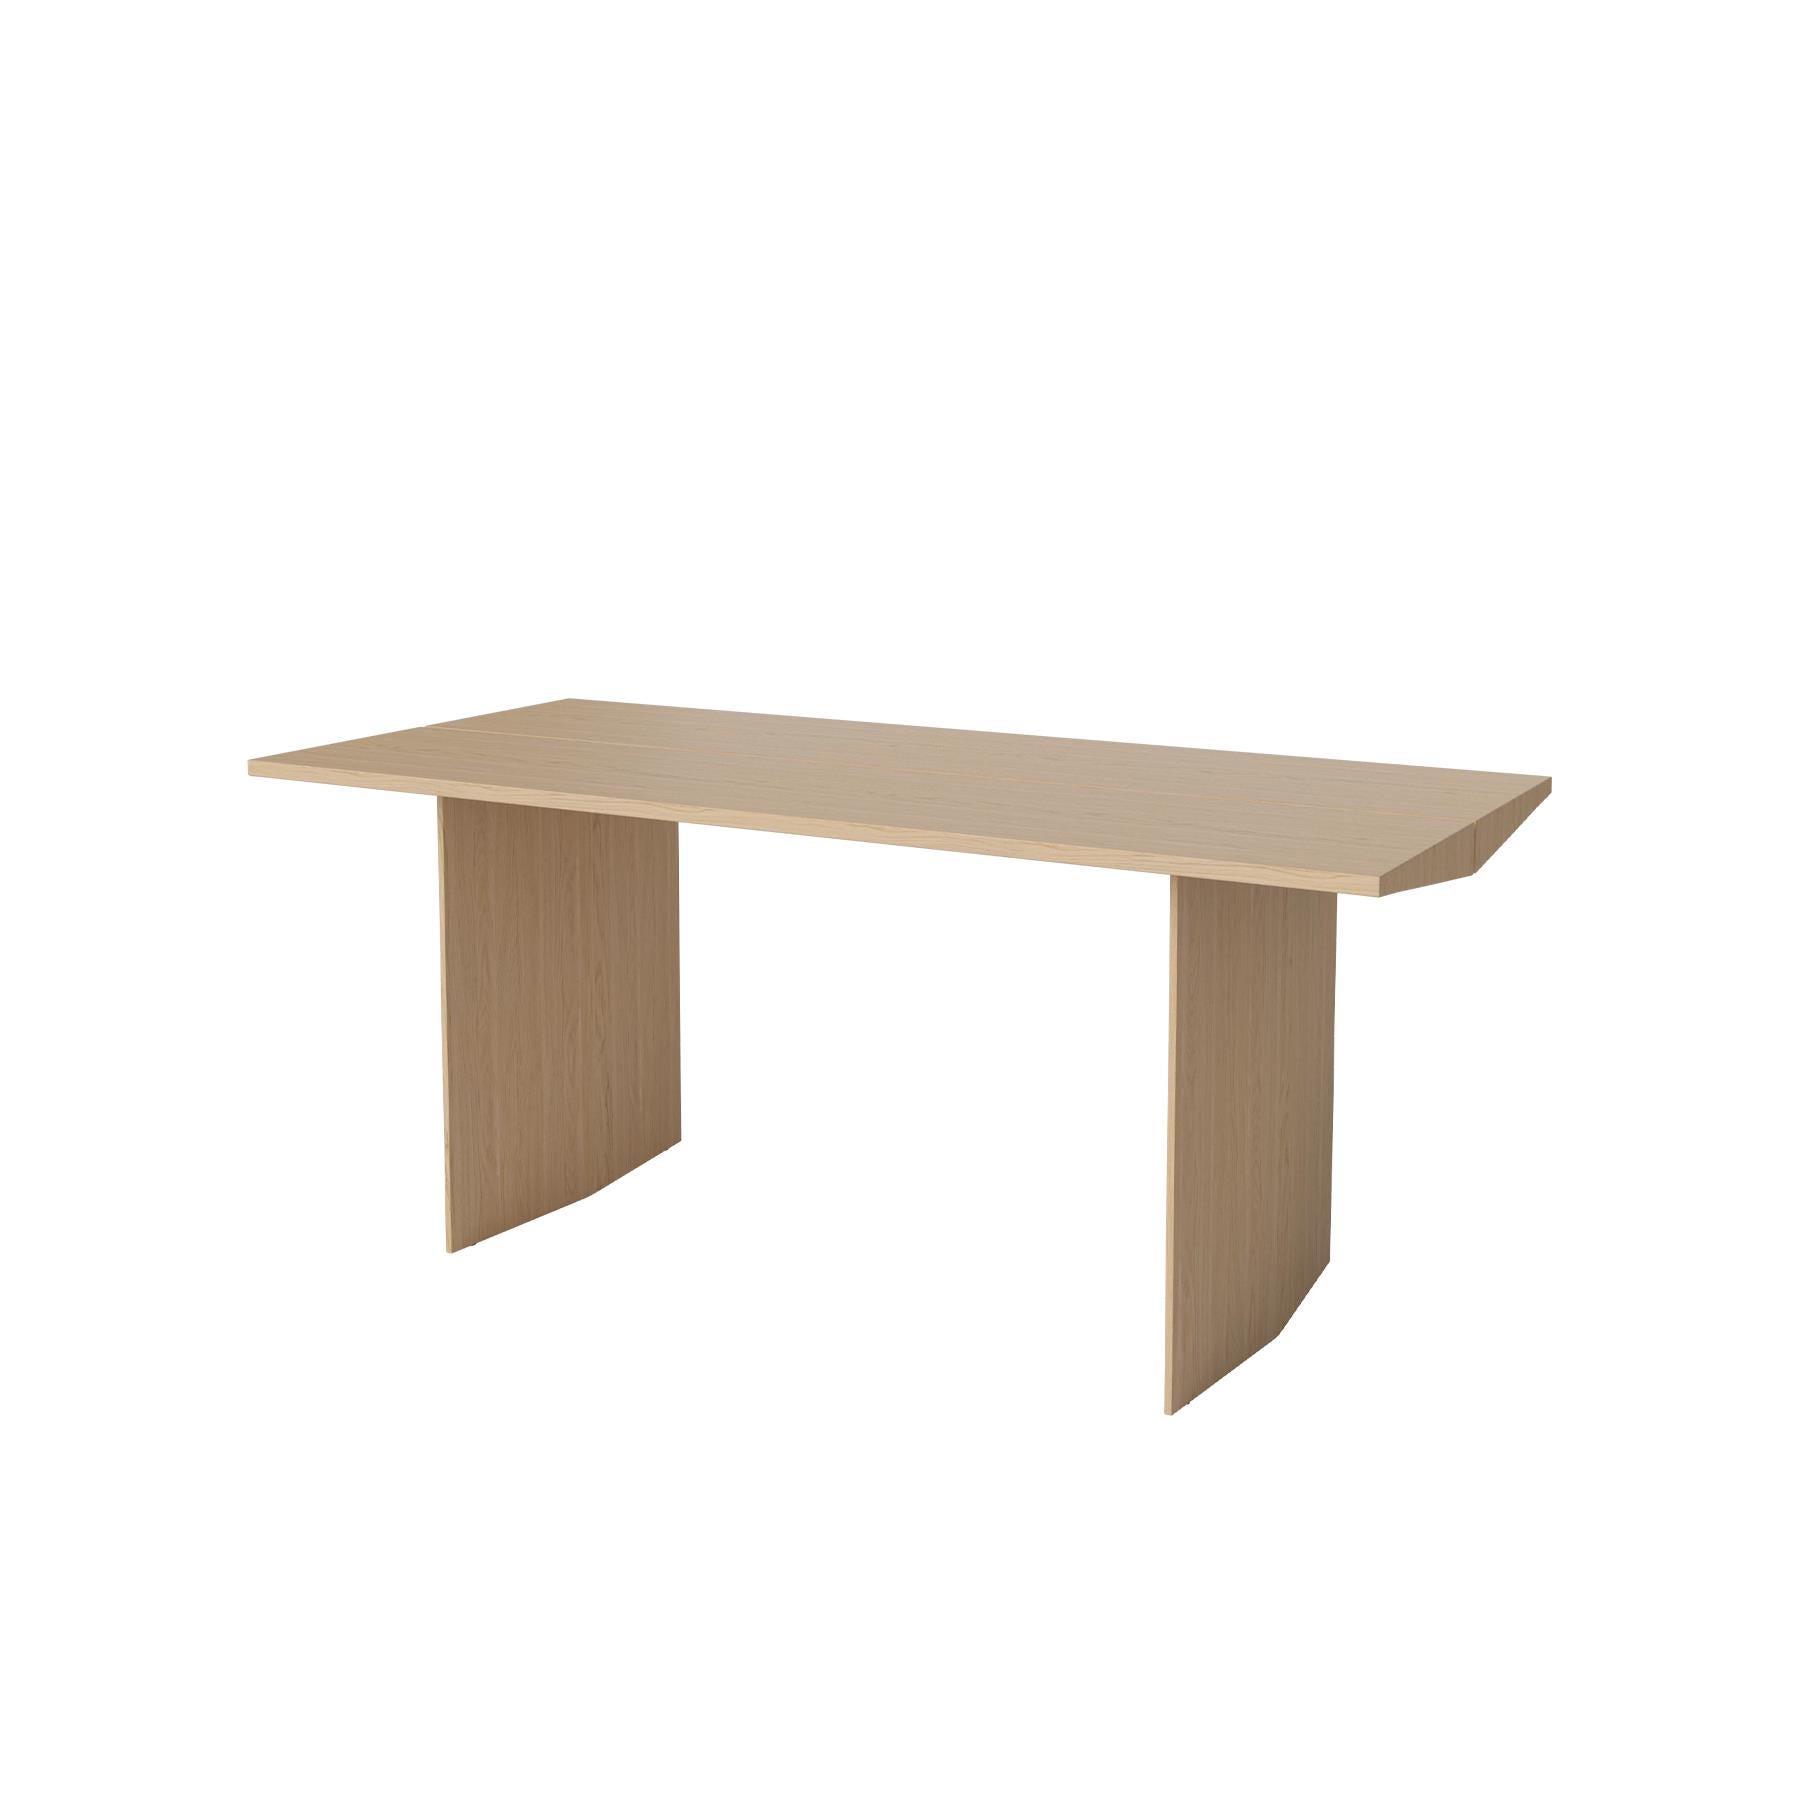 Bolia Alp Dining Table White Oiled Oak Lenghth 200cm Light Wood Designer Furniture From Holloways Of Ludlow